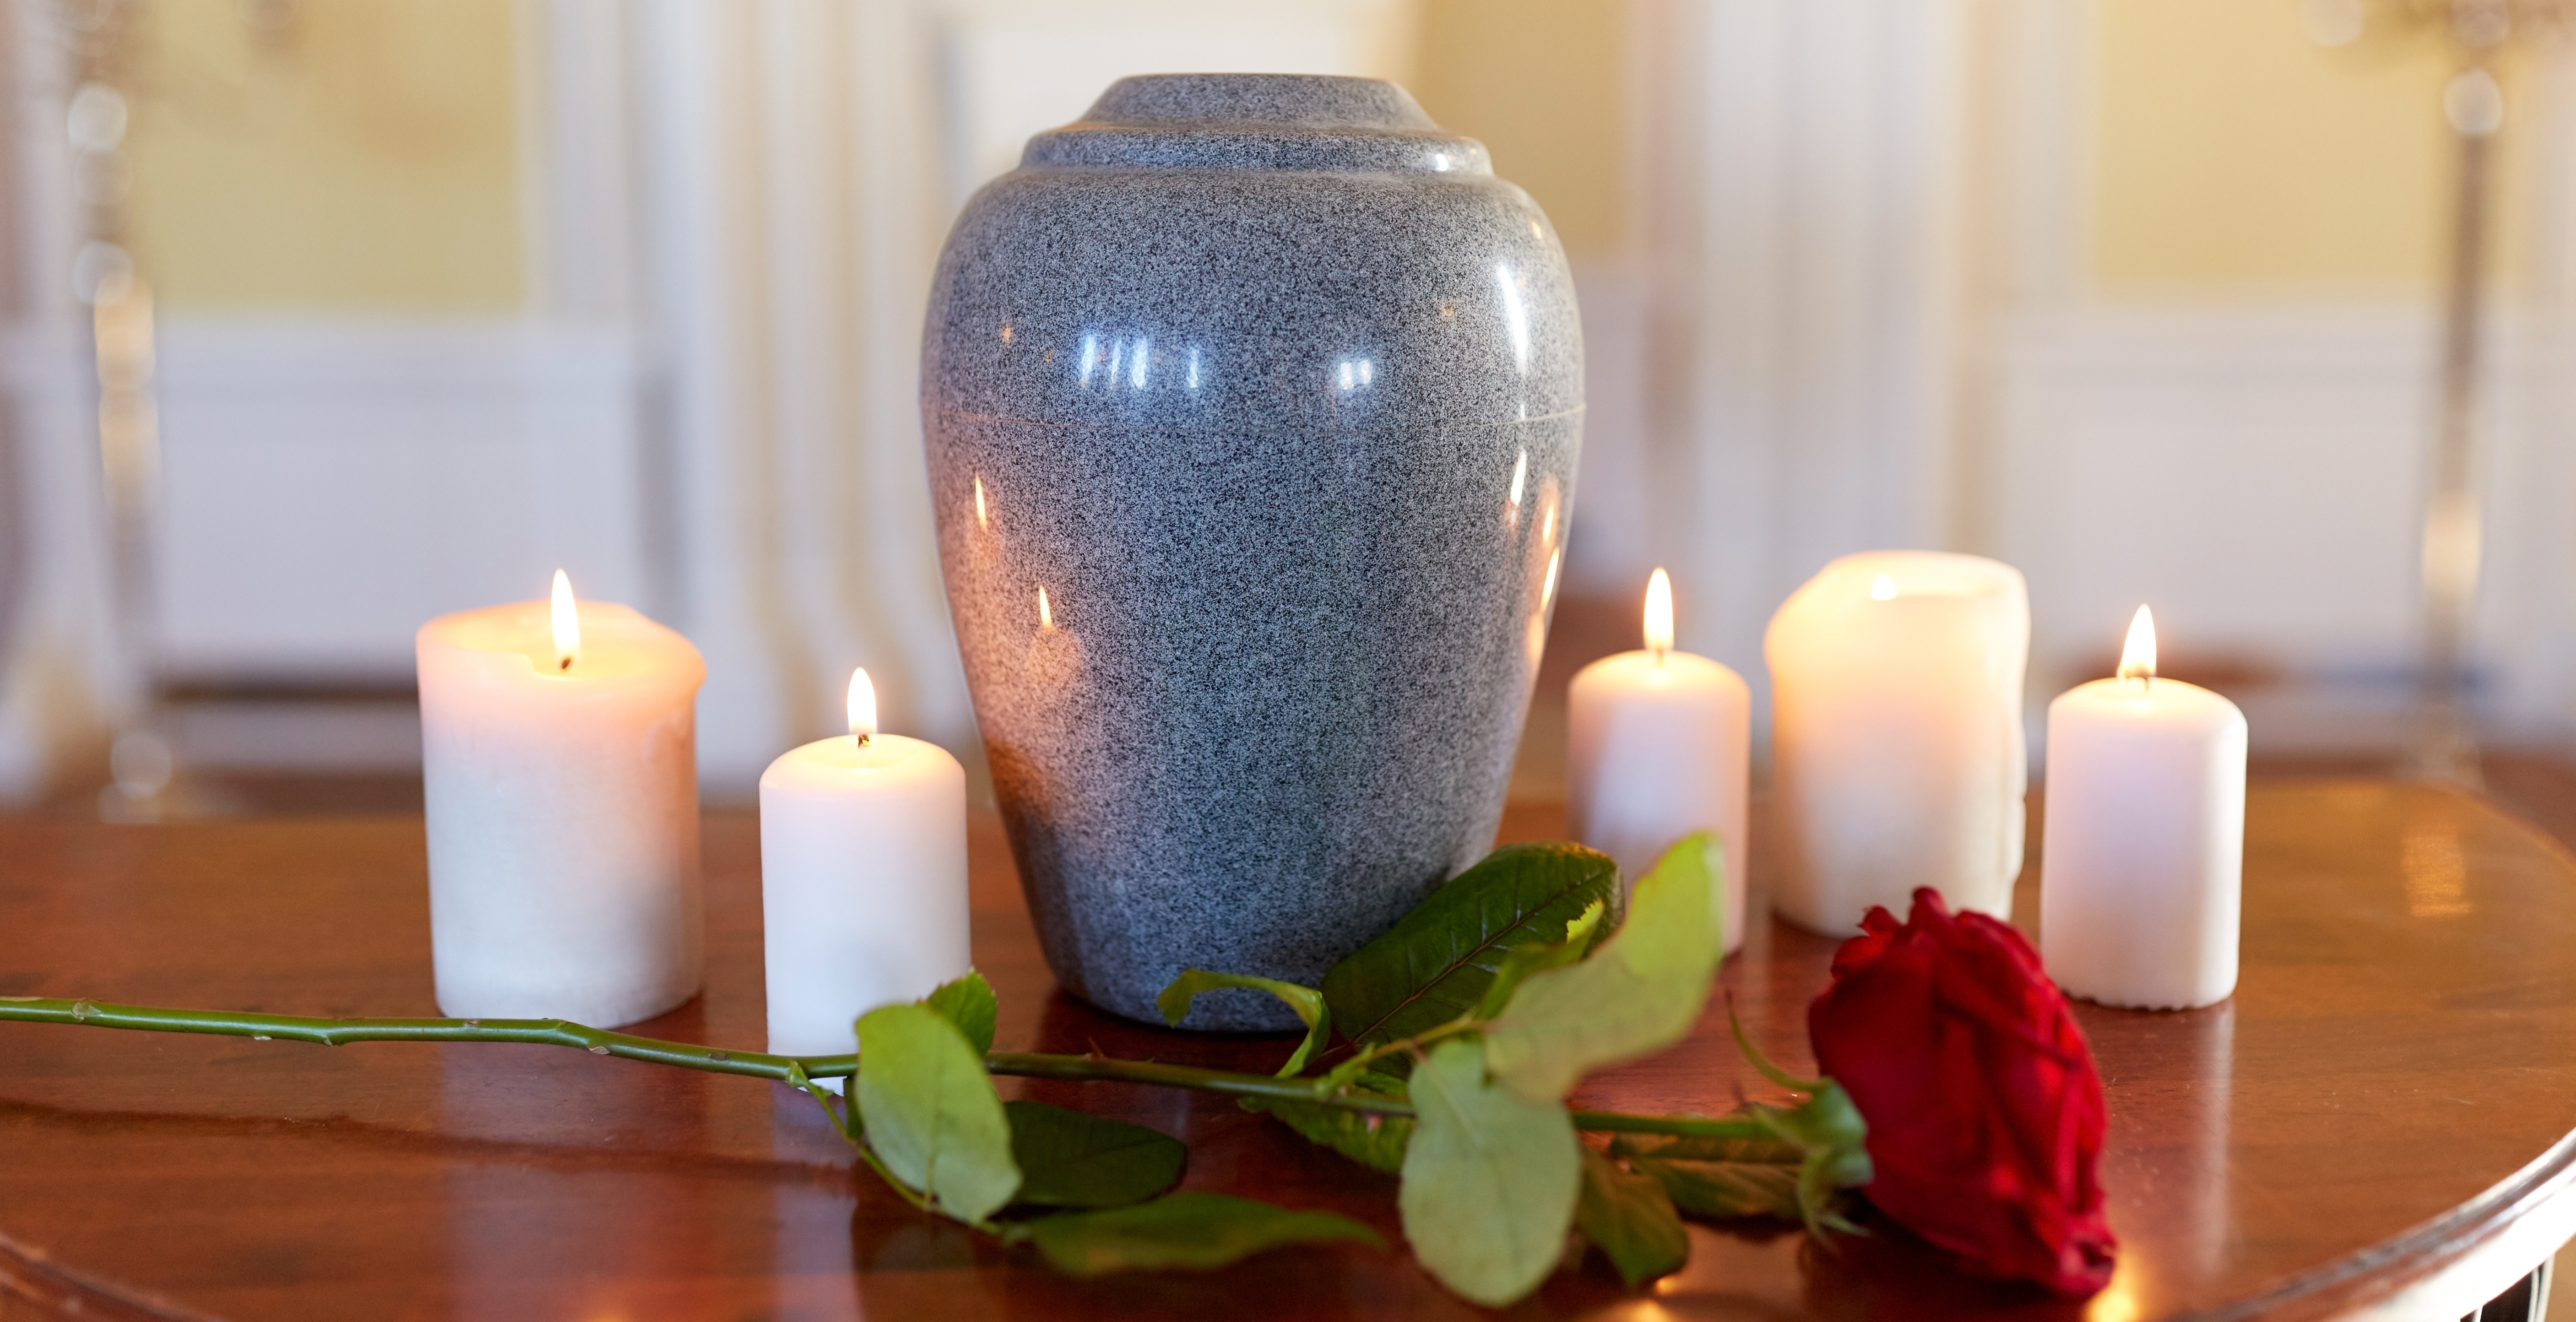 red rose and cremation urn with burning candles